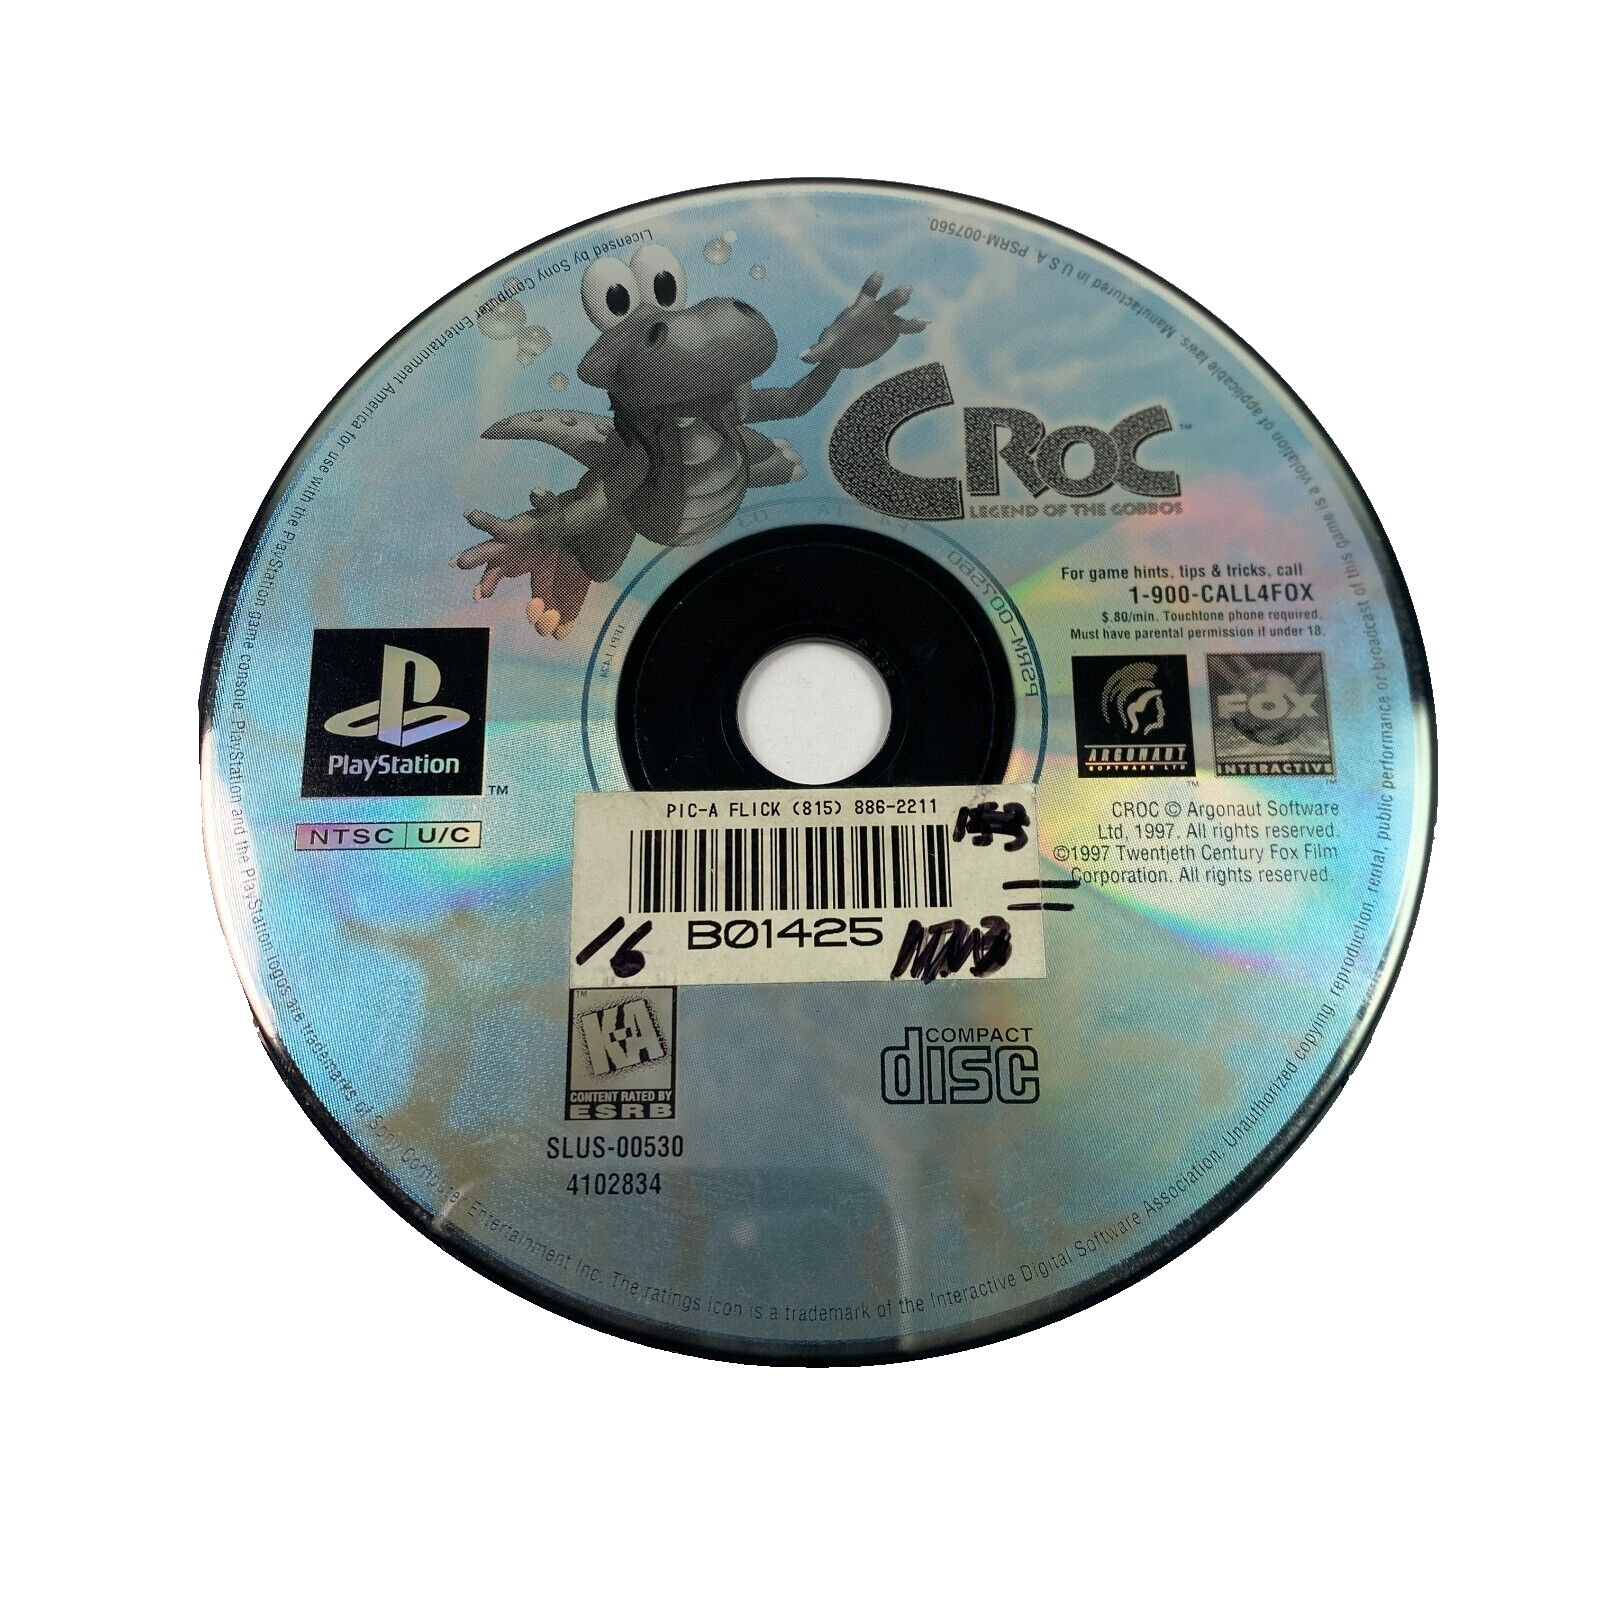 Croc Legend of the Gobbs Sony Playstation PS1 Video Game 1998 DISC ONLY - $11.49